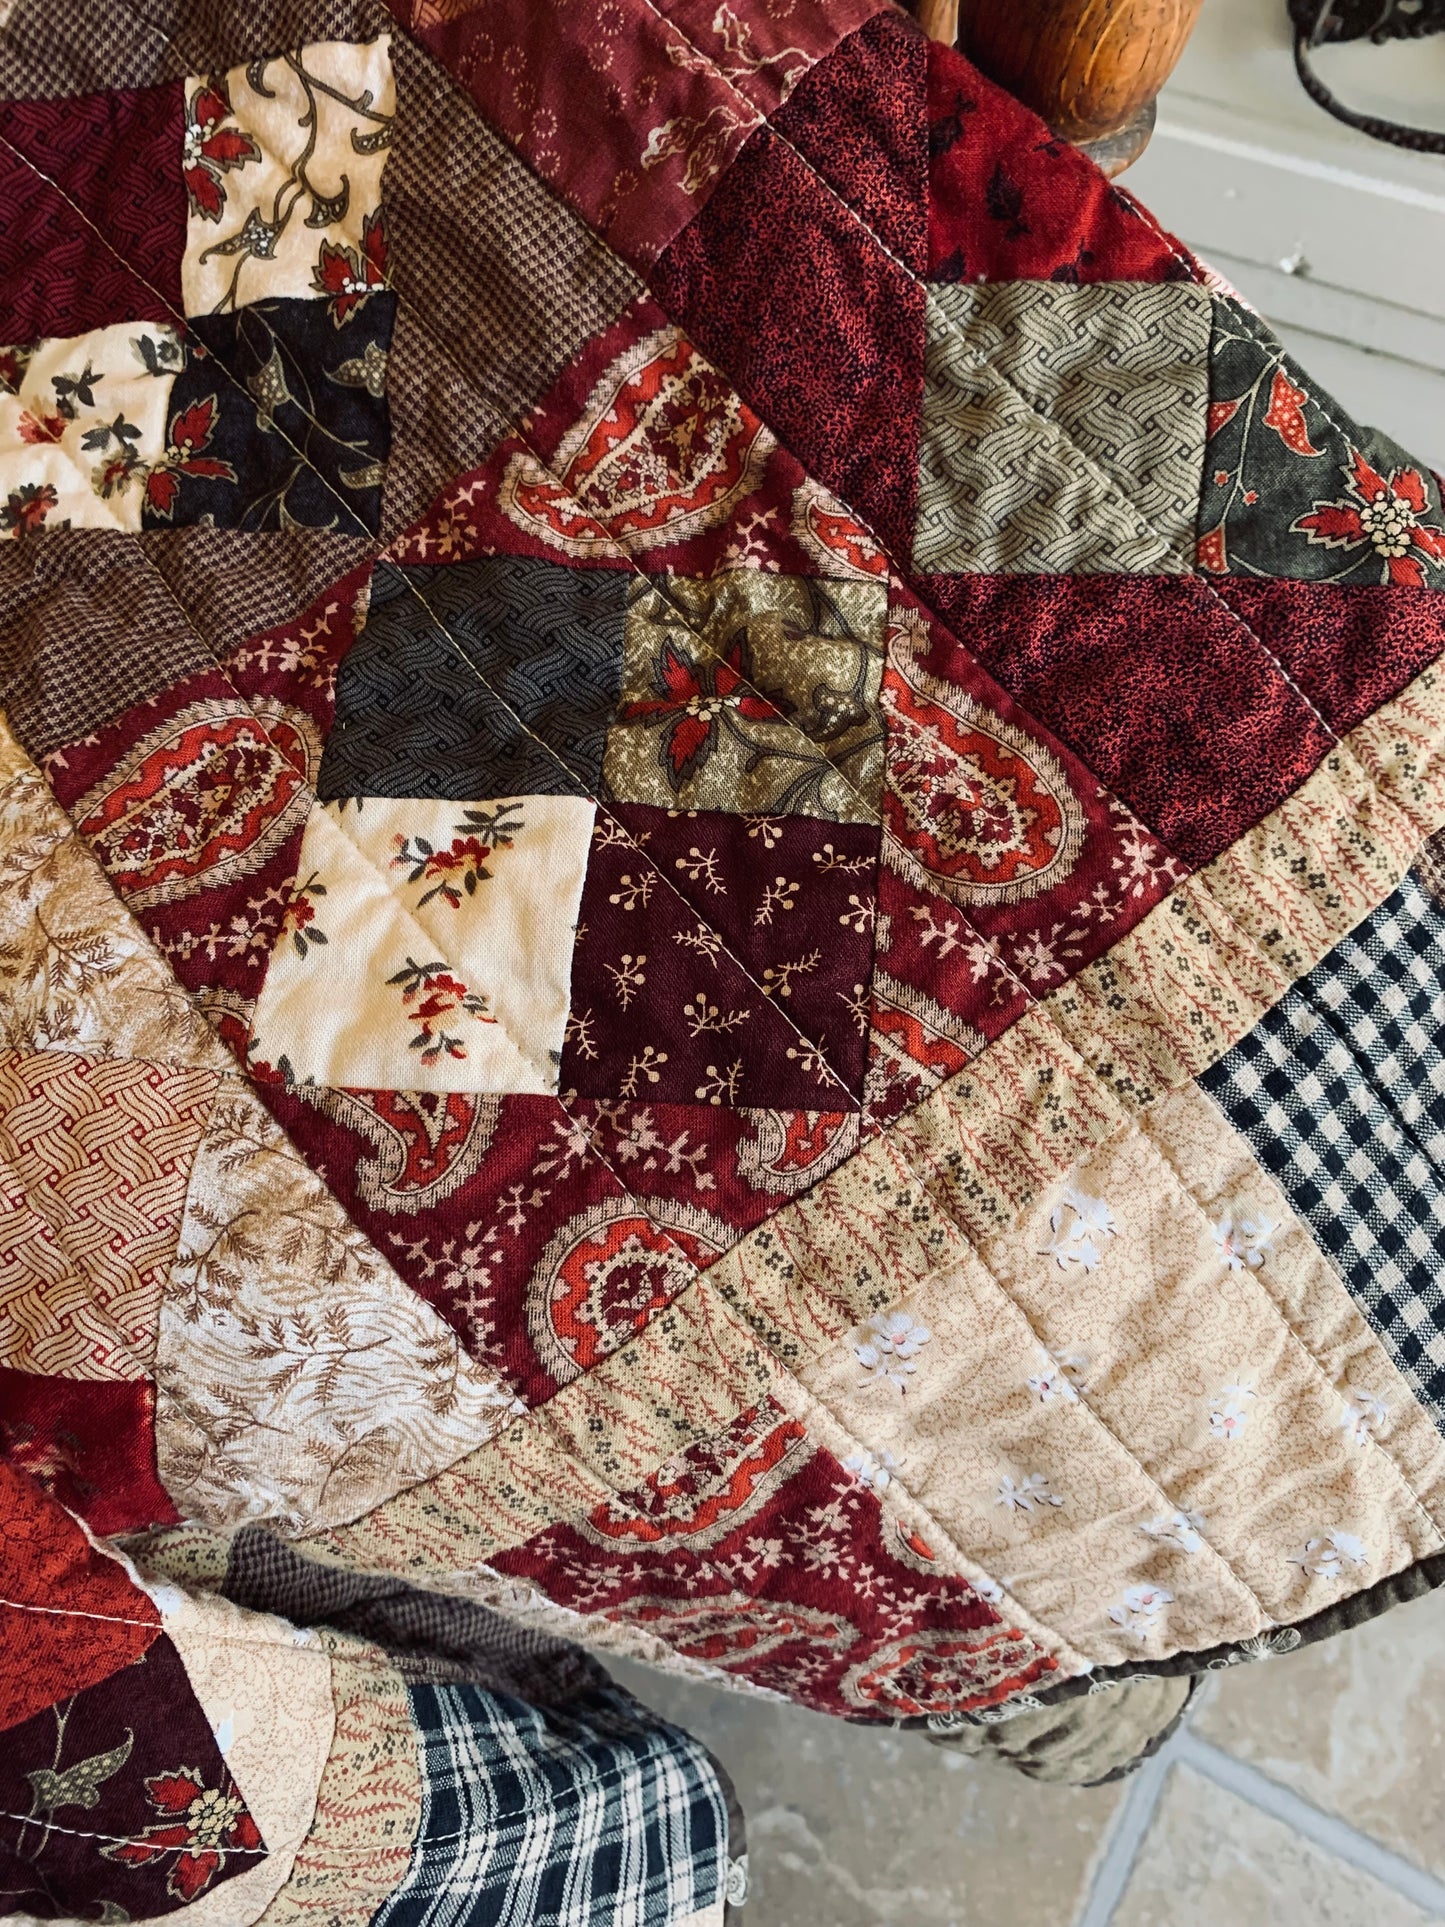 Four-Patch on Point Rustic Cabin Quilt